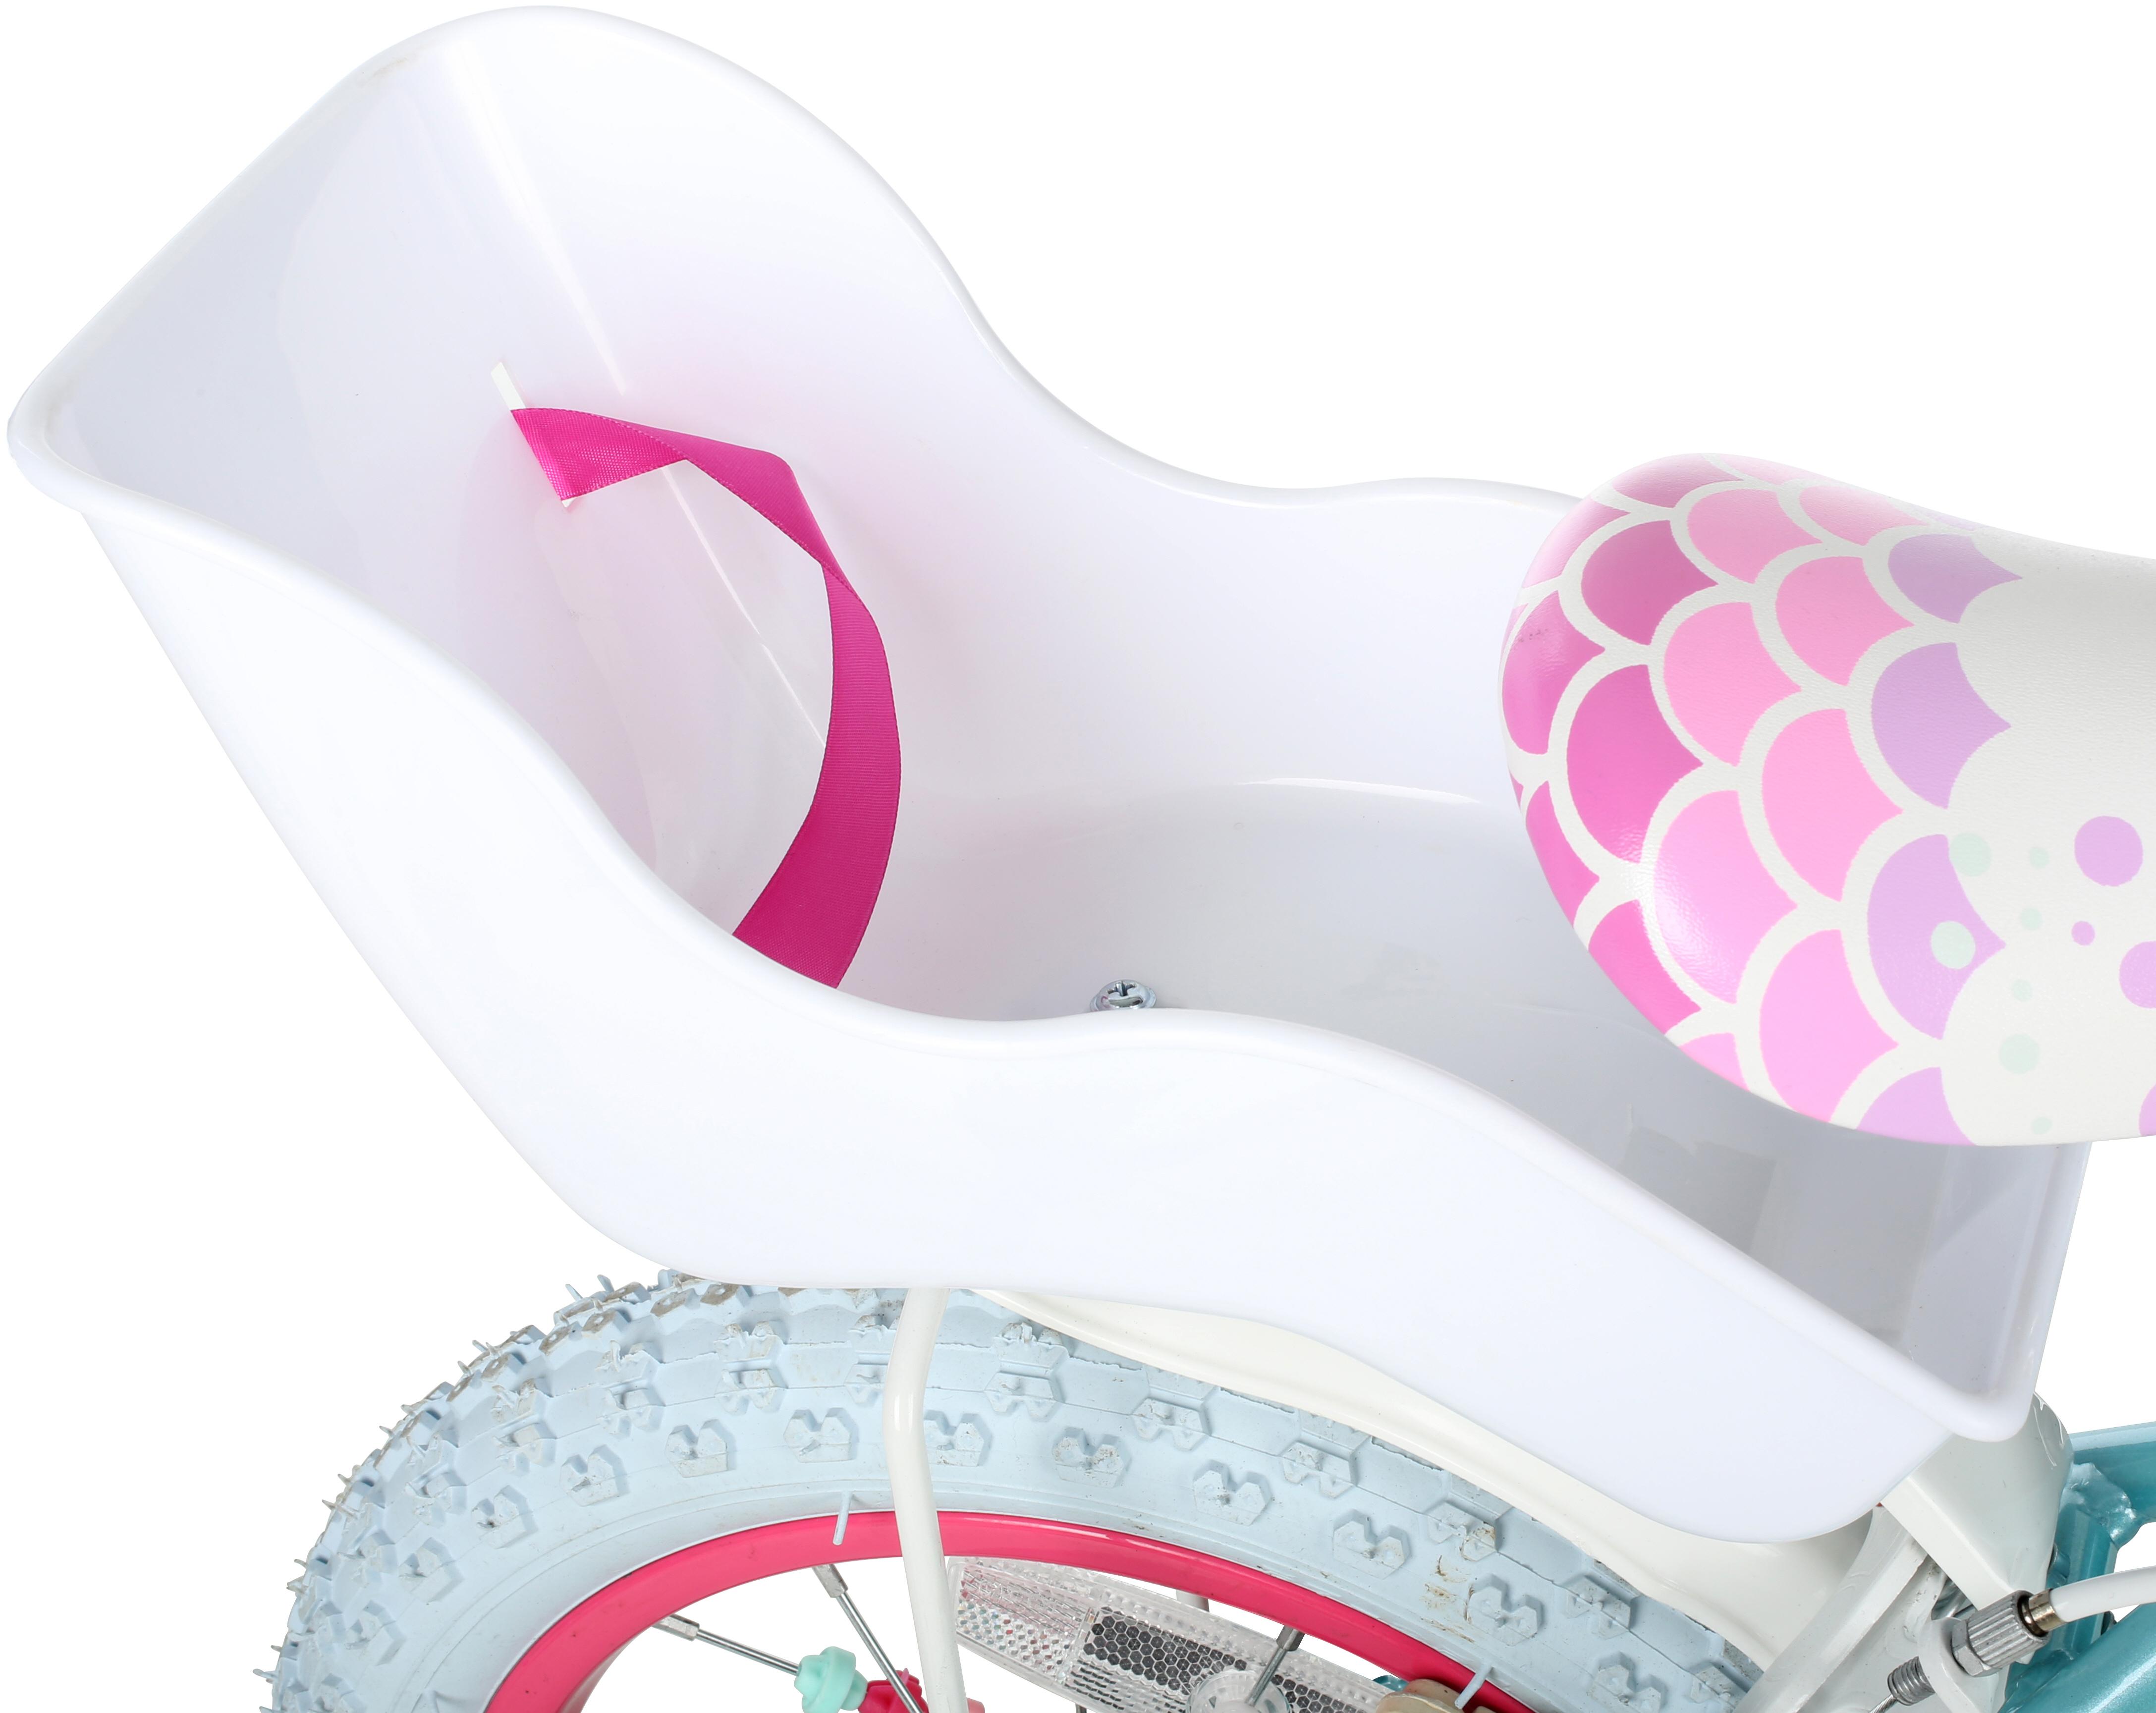 halfords bike seats for toddlers